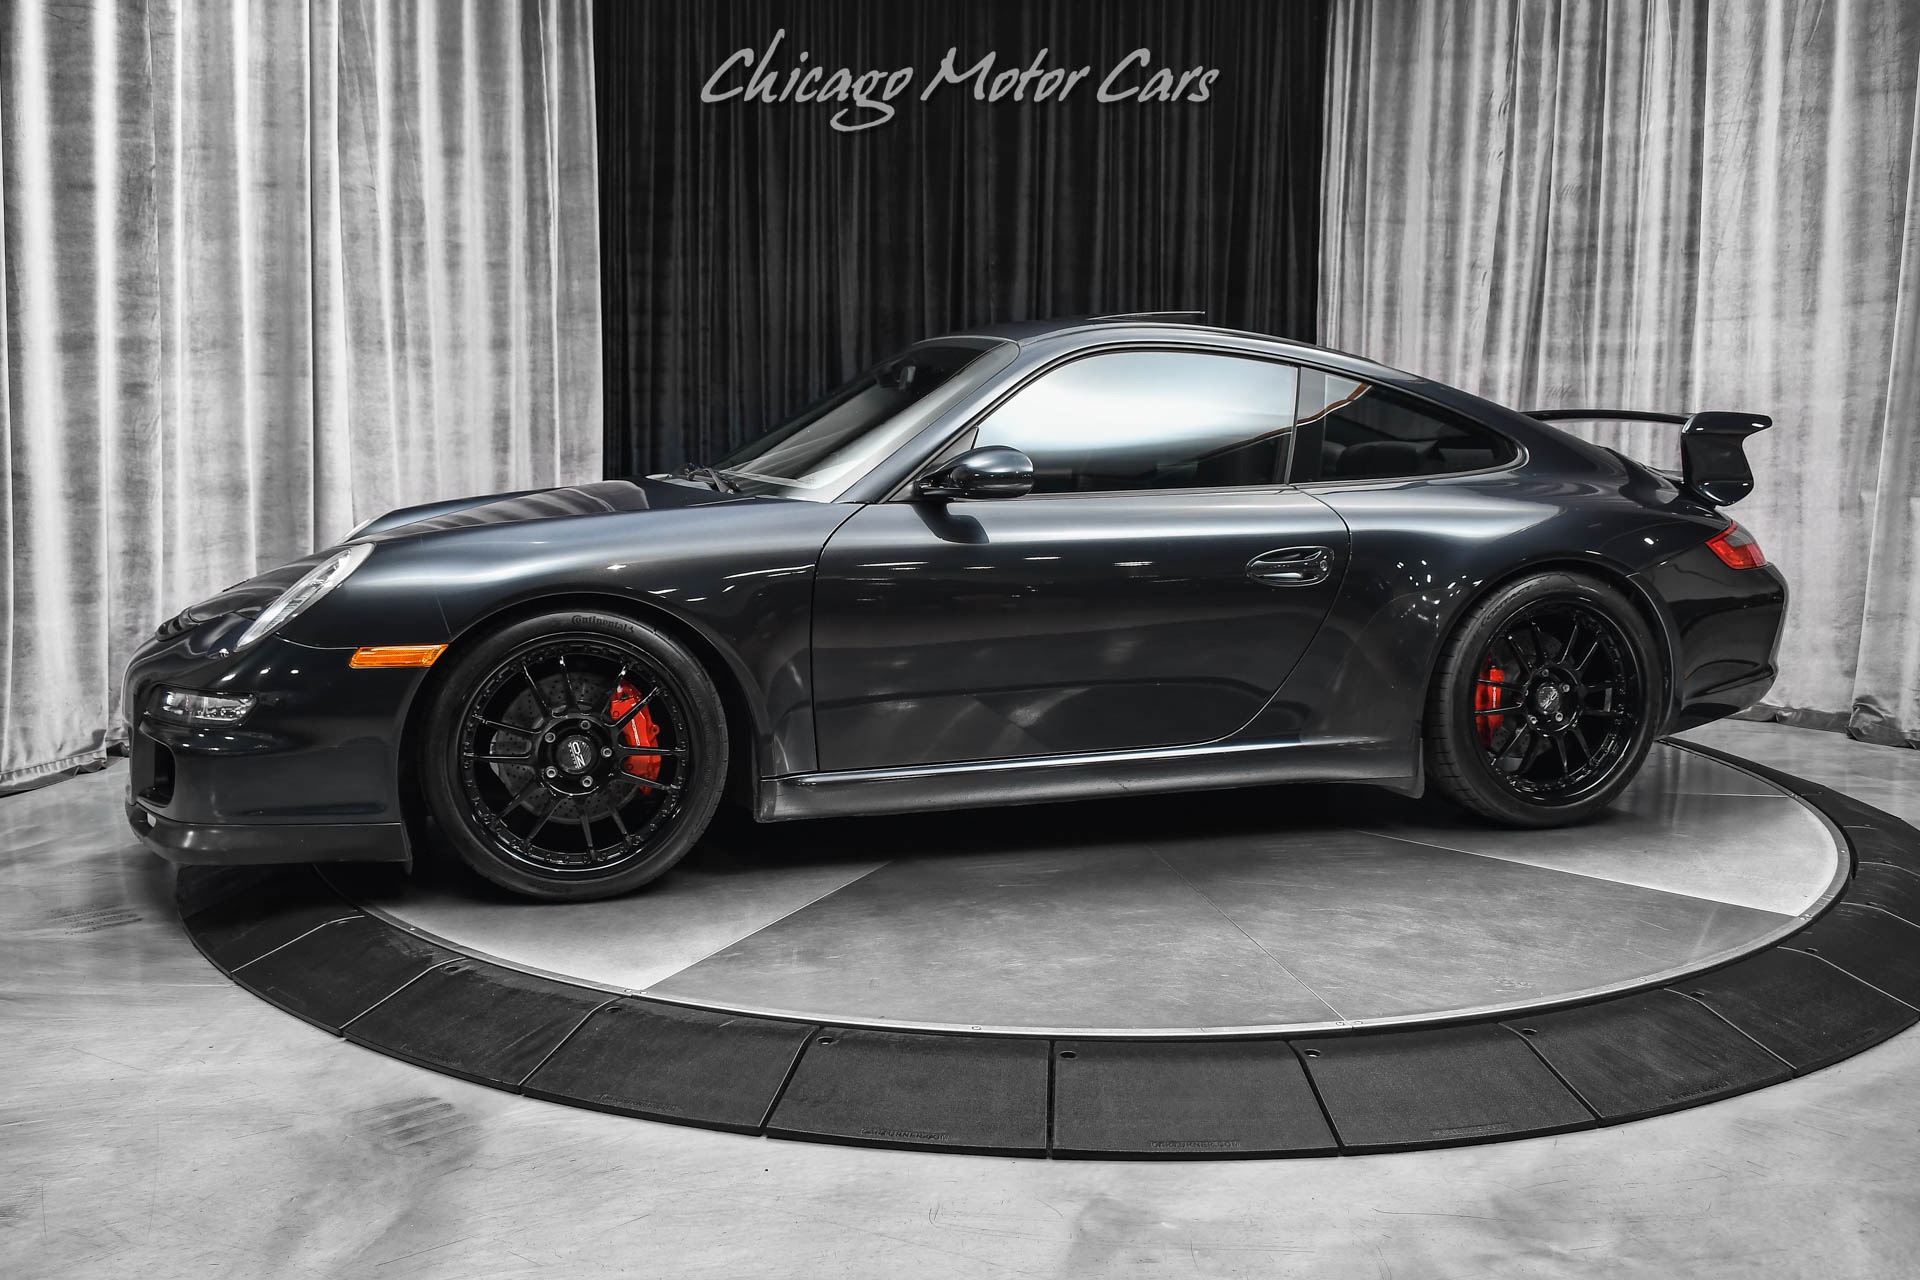 Used 2006 Porsche 911 Carrera S Coupe OZ Wheels 6 Spd Manual Tasteful  Upgrades! Remus Headers! Aero Wing! For Sale (Special Pricing) | Chicago  Motor Cars Stock #20060